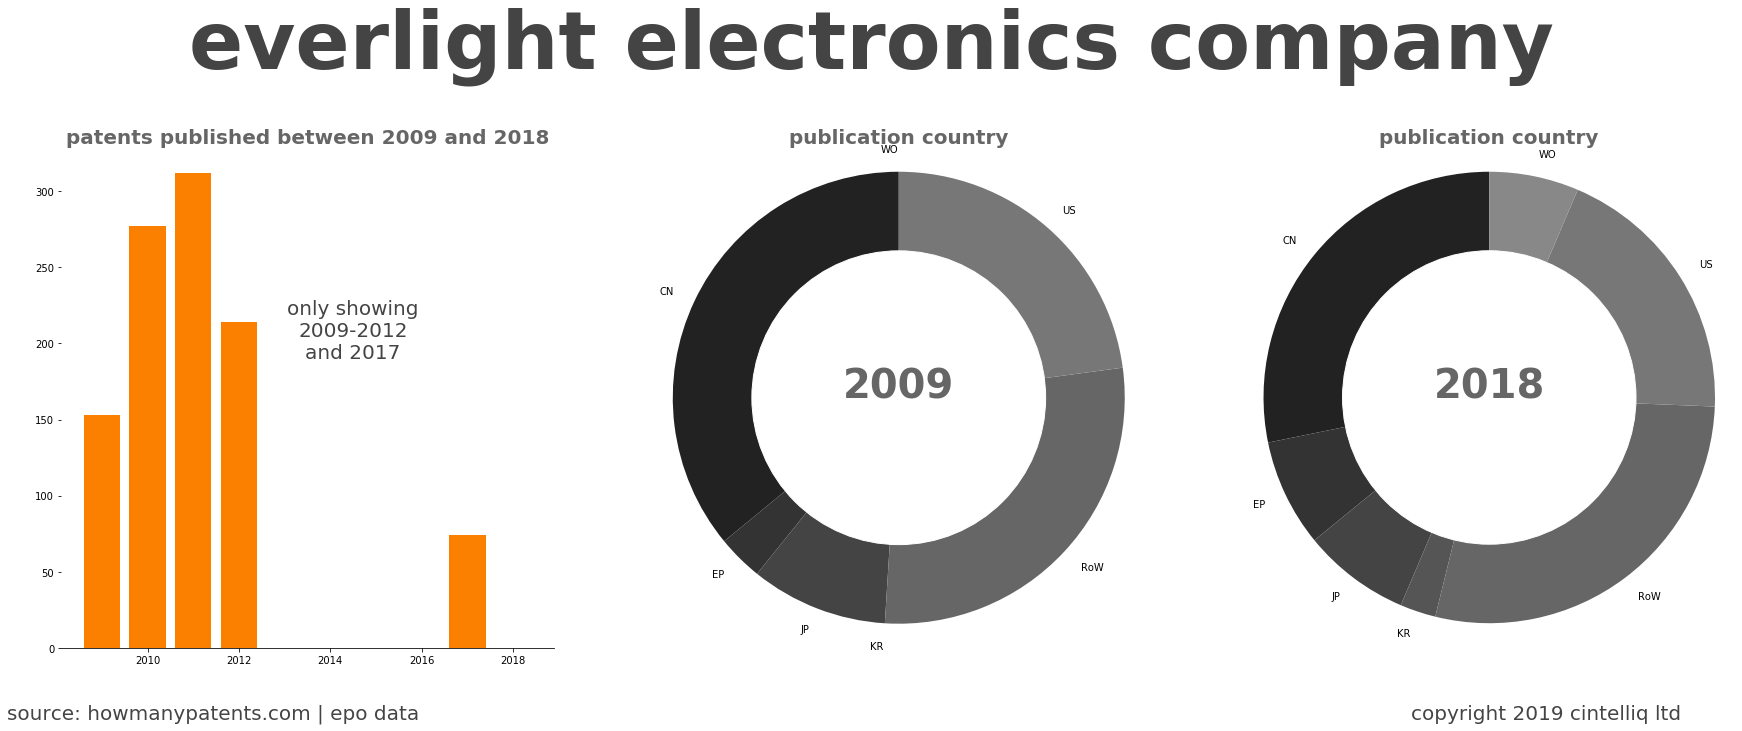 summary of patents for Everlight Electronics Company